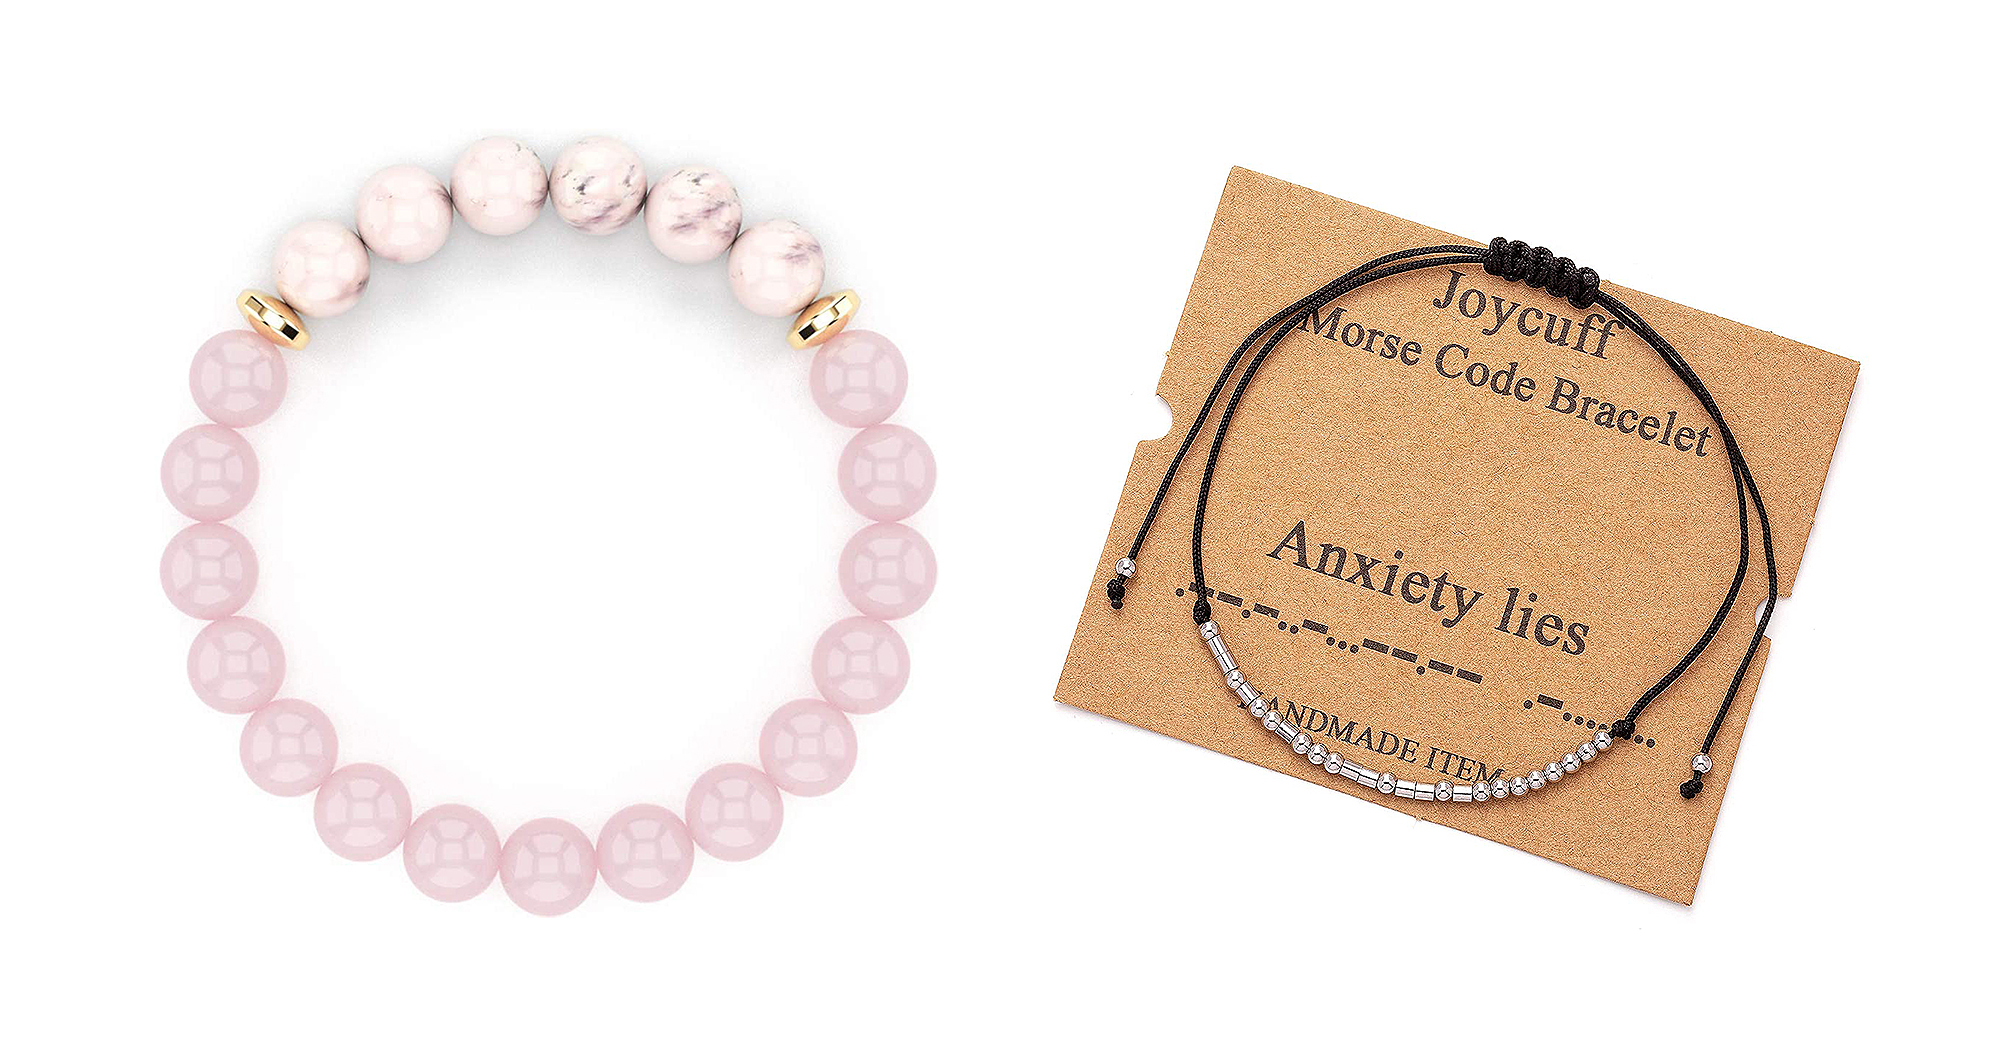 Anxiety Stress Cord Bracelet - Meaningful Charm